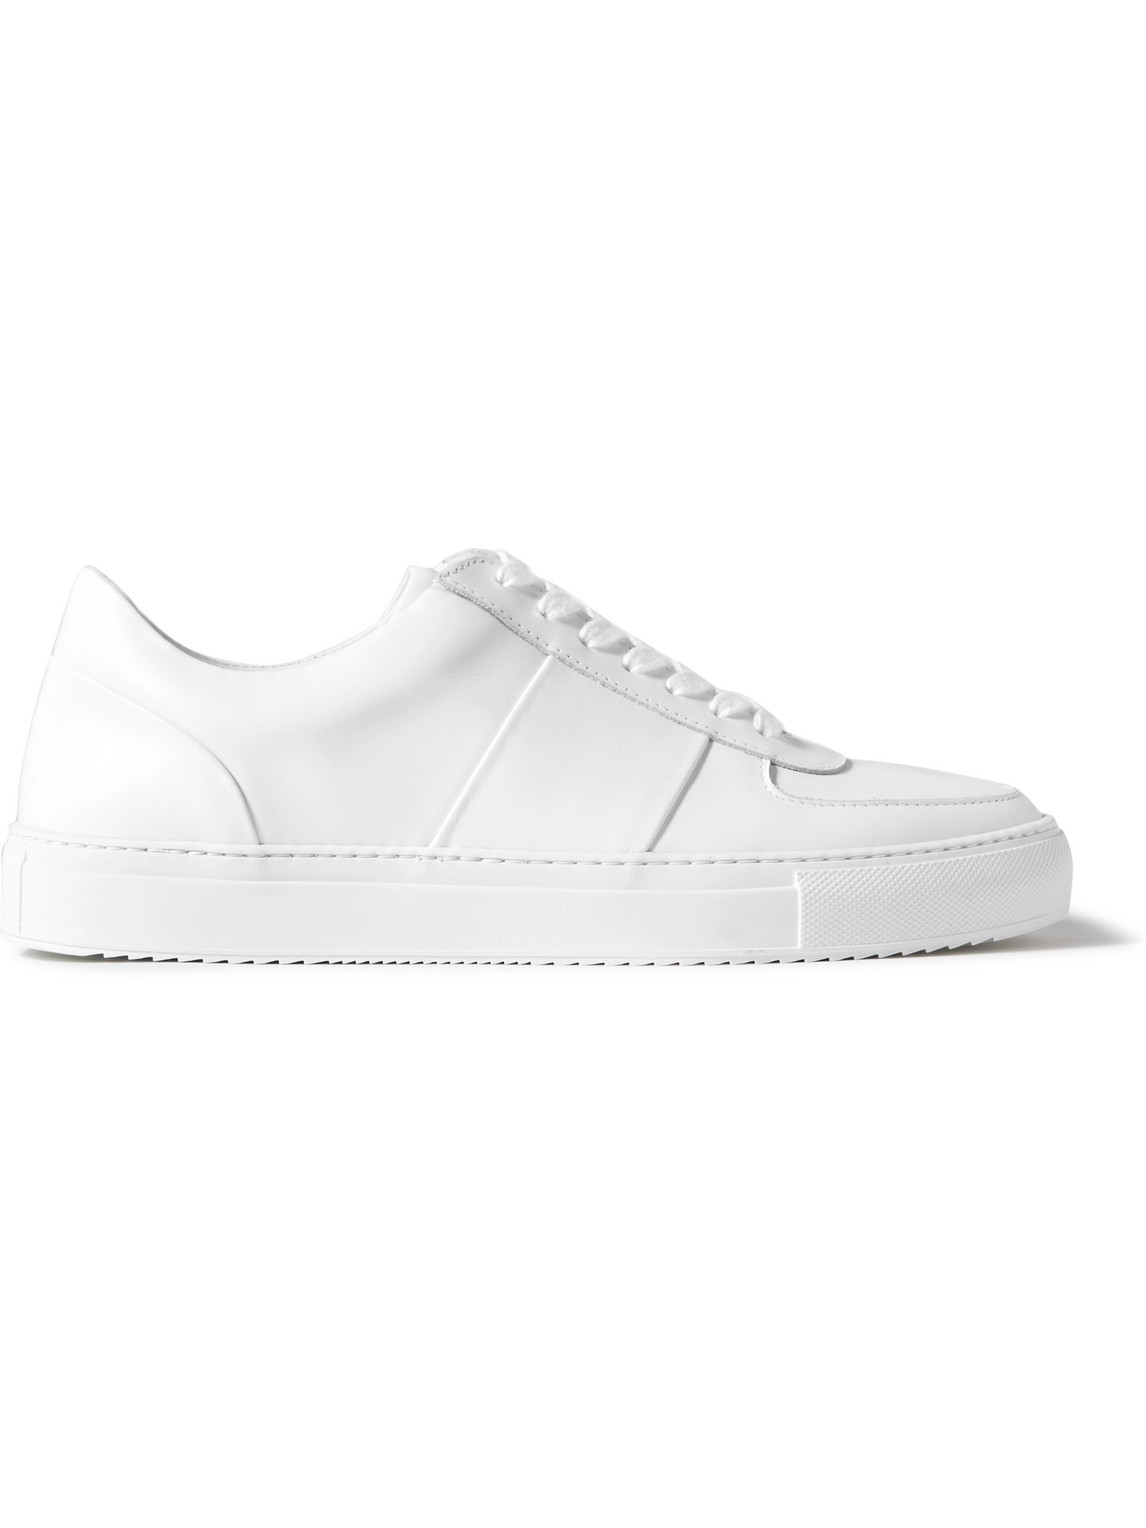 Mr P. Larry Leather Sneakers In White